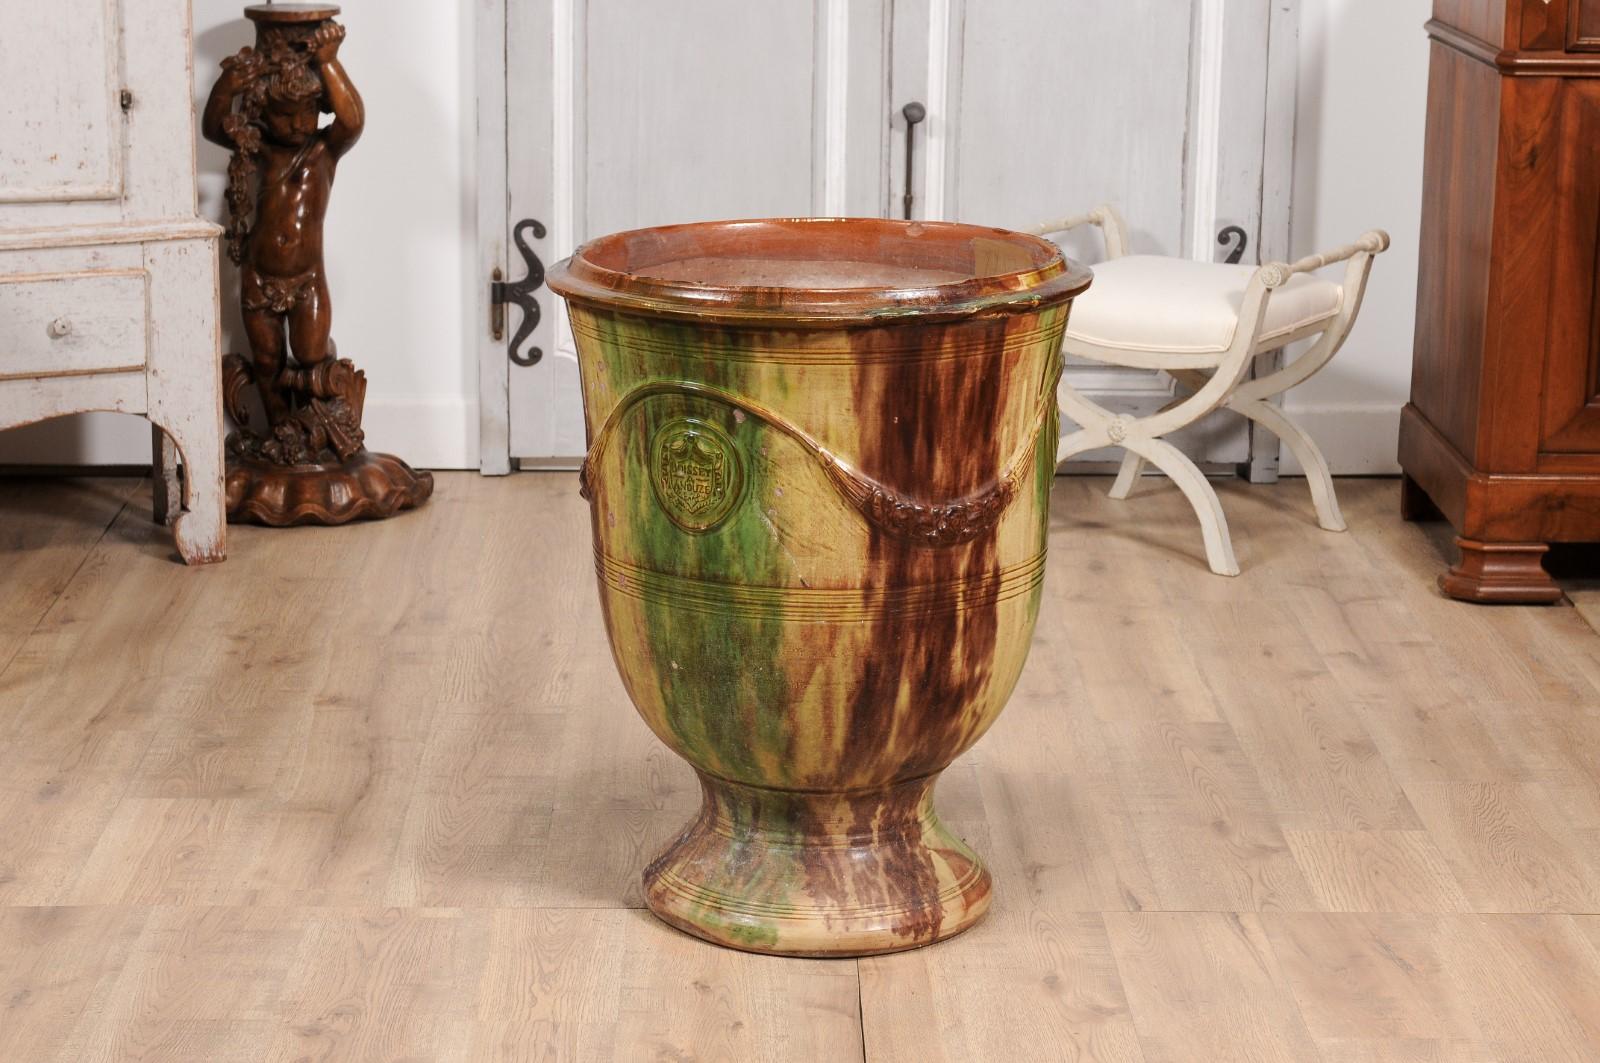 Large French Boisset Anduze Jar with Brown, Green Glaze and Swags, 21st Century For Sale 1